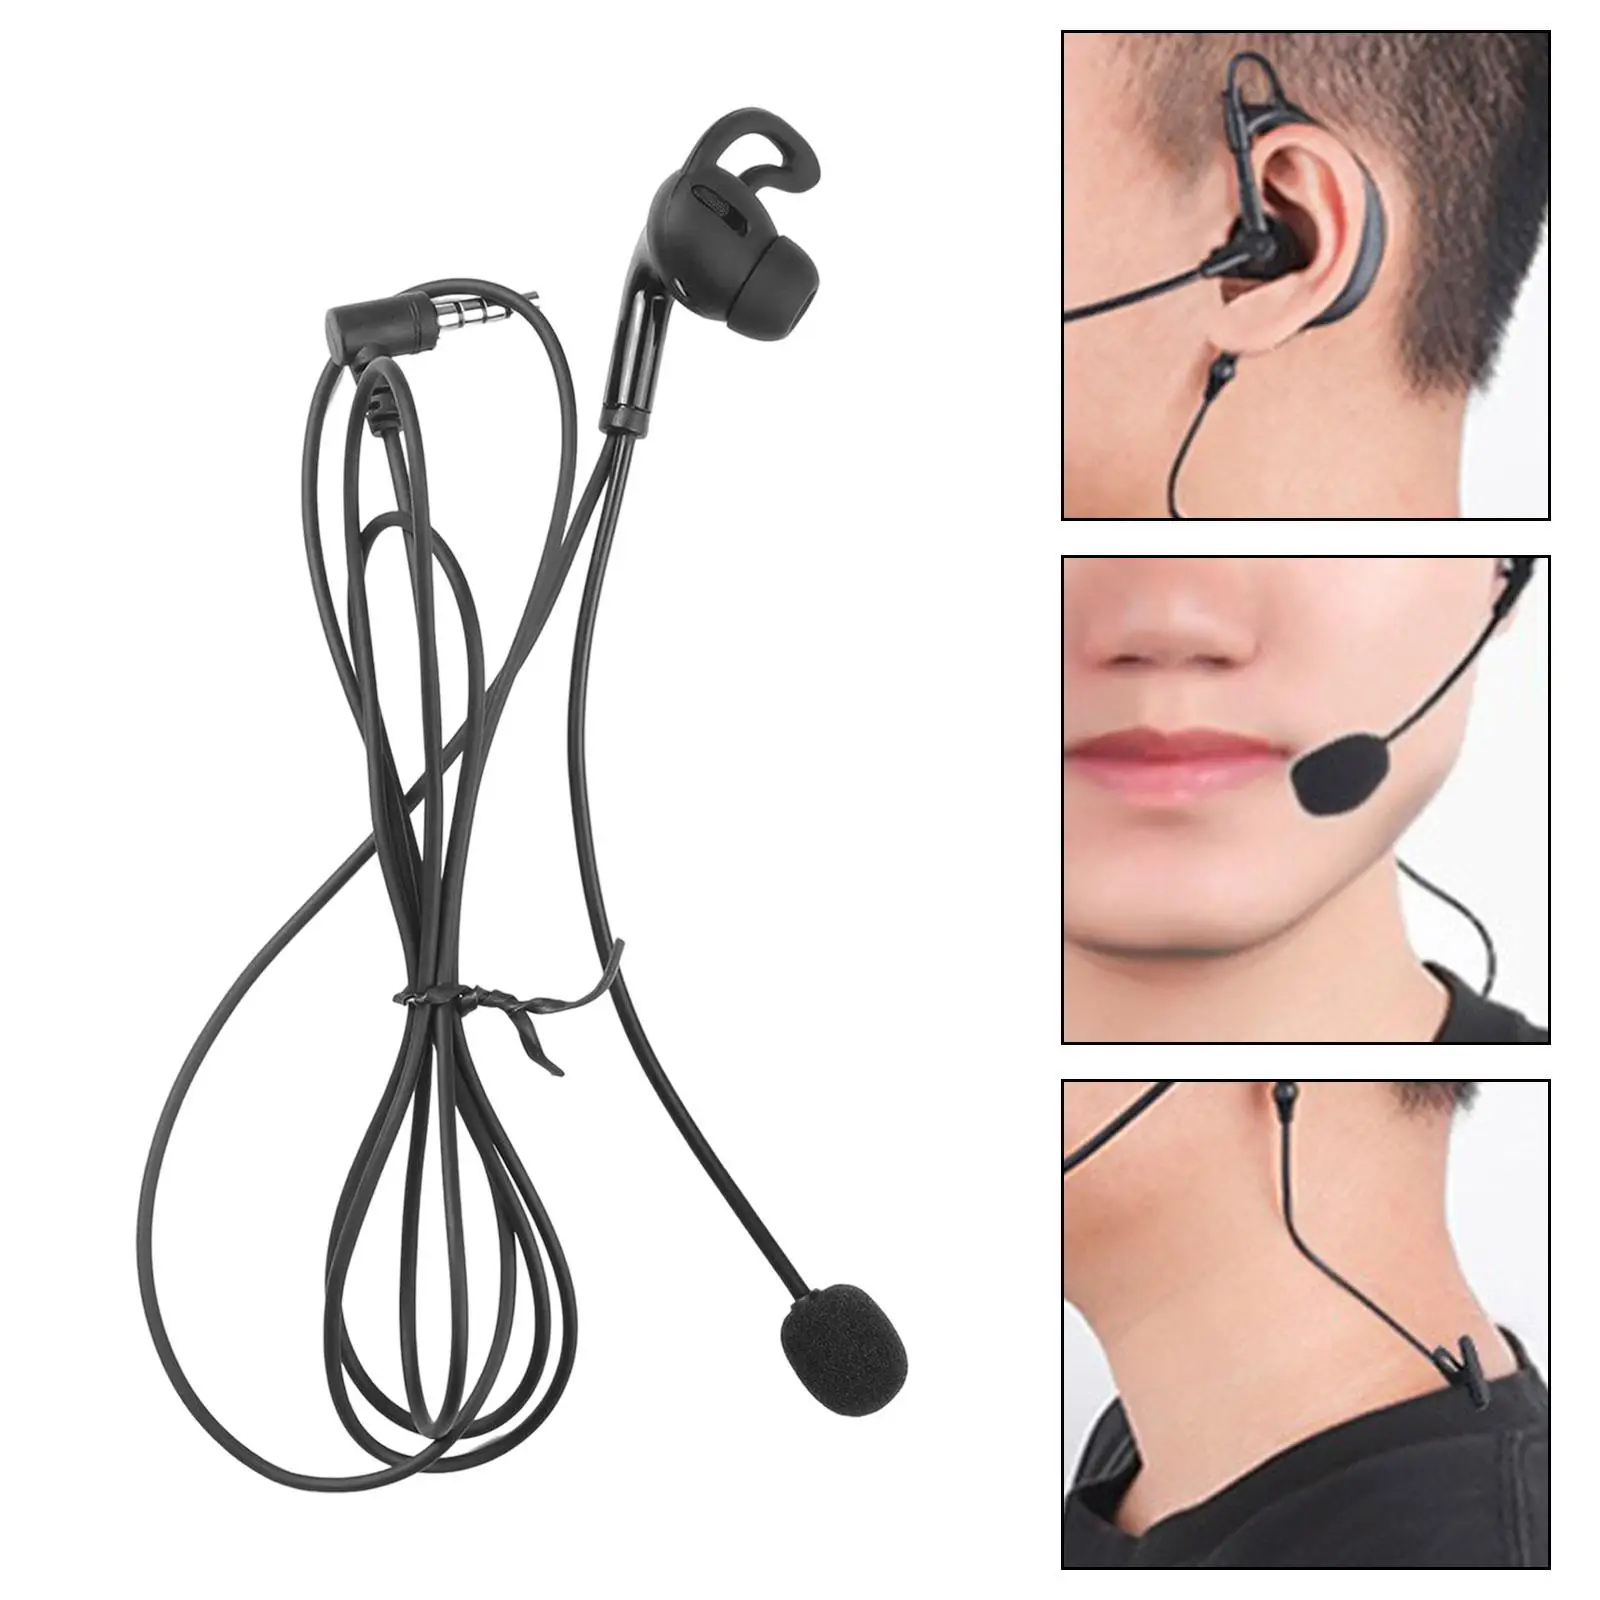 Referee Single Ear Earphone Wired Professional Remote In-Ear Earphones Headset Durable USB Earbuds for Phones Driver